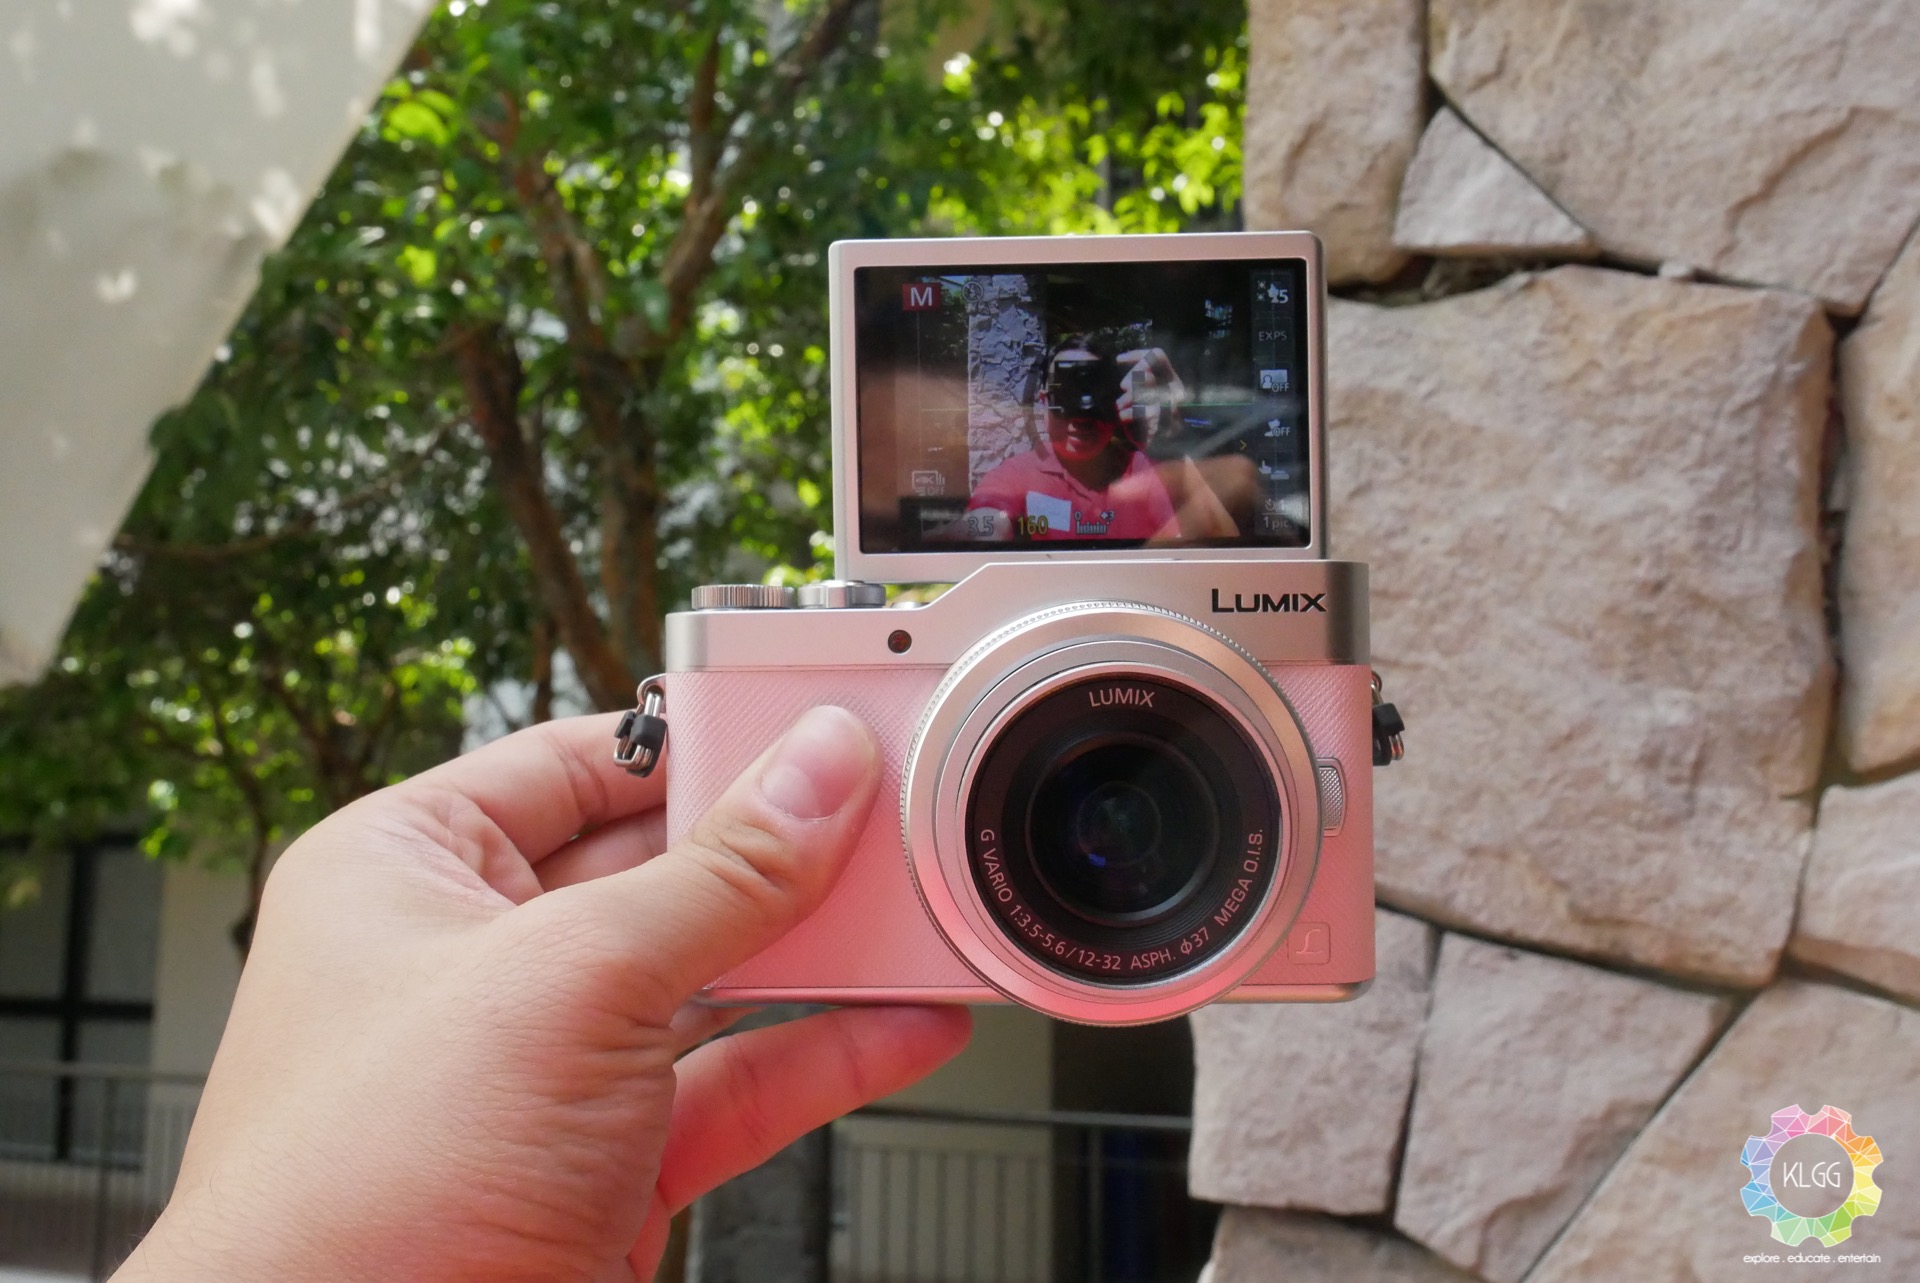 Panasonic's Lumix GF9 takes 4K videos and selfies for less than